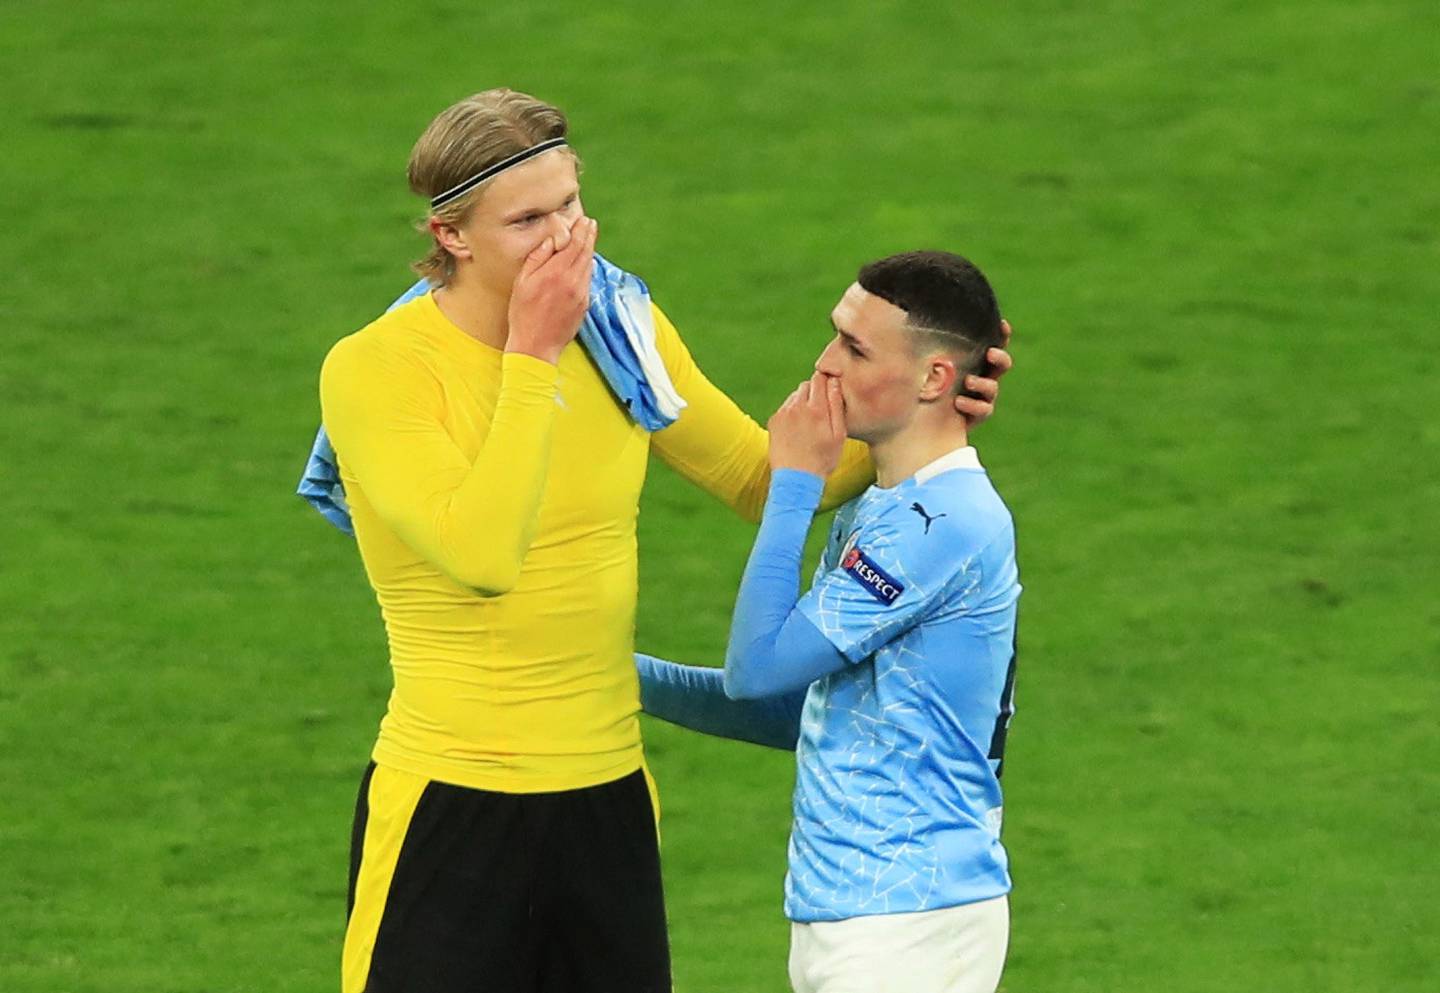 Borussia Dortmund's Erling Haaland and Manchester City's Phil Foden after the teams met in the Champions League in April, 2021. Reuters